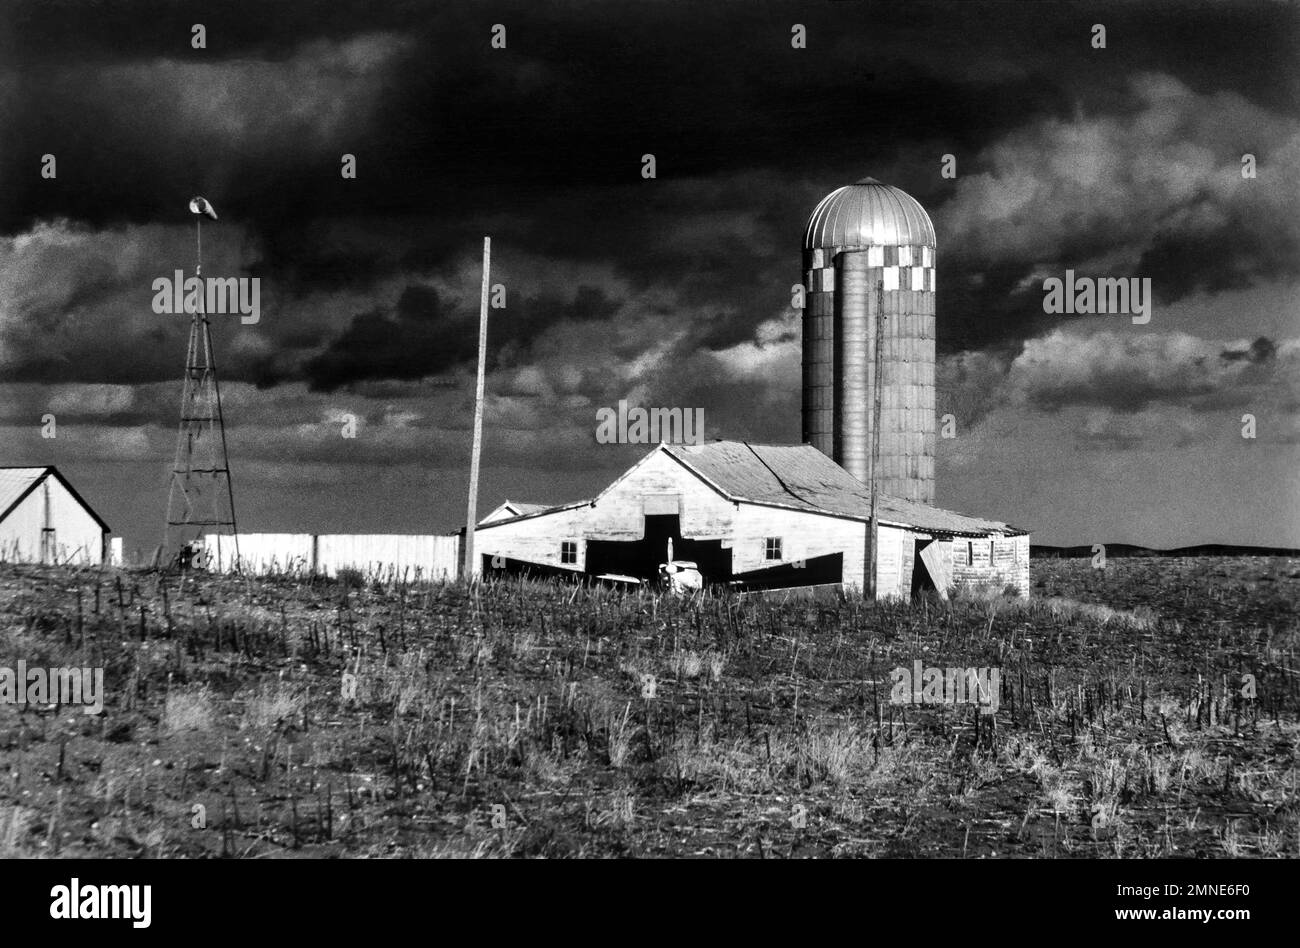 Severe weather with a barn adapted as an airplane aviation hangar at a rural farm on the Northern Great Plains of the United States Stock Photo